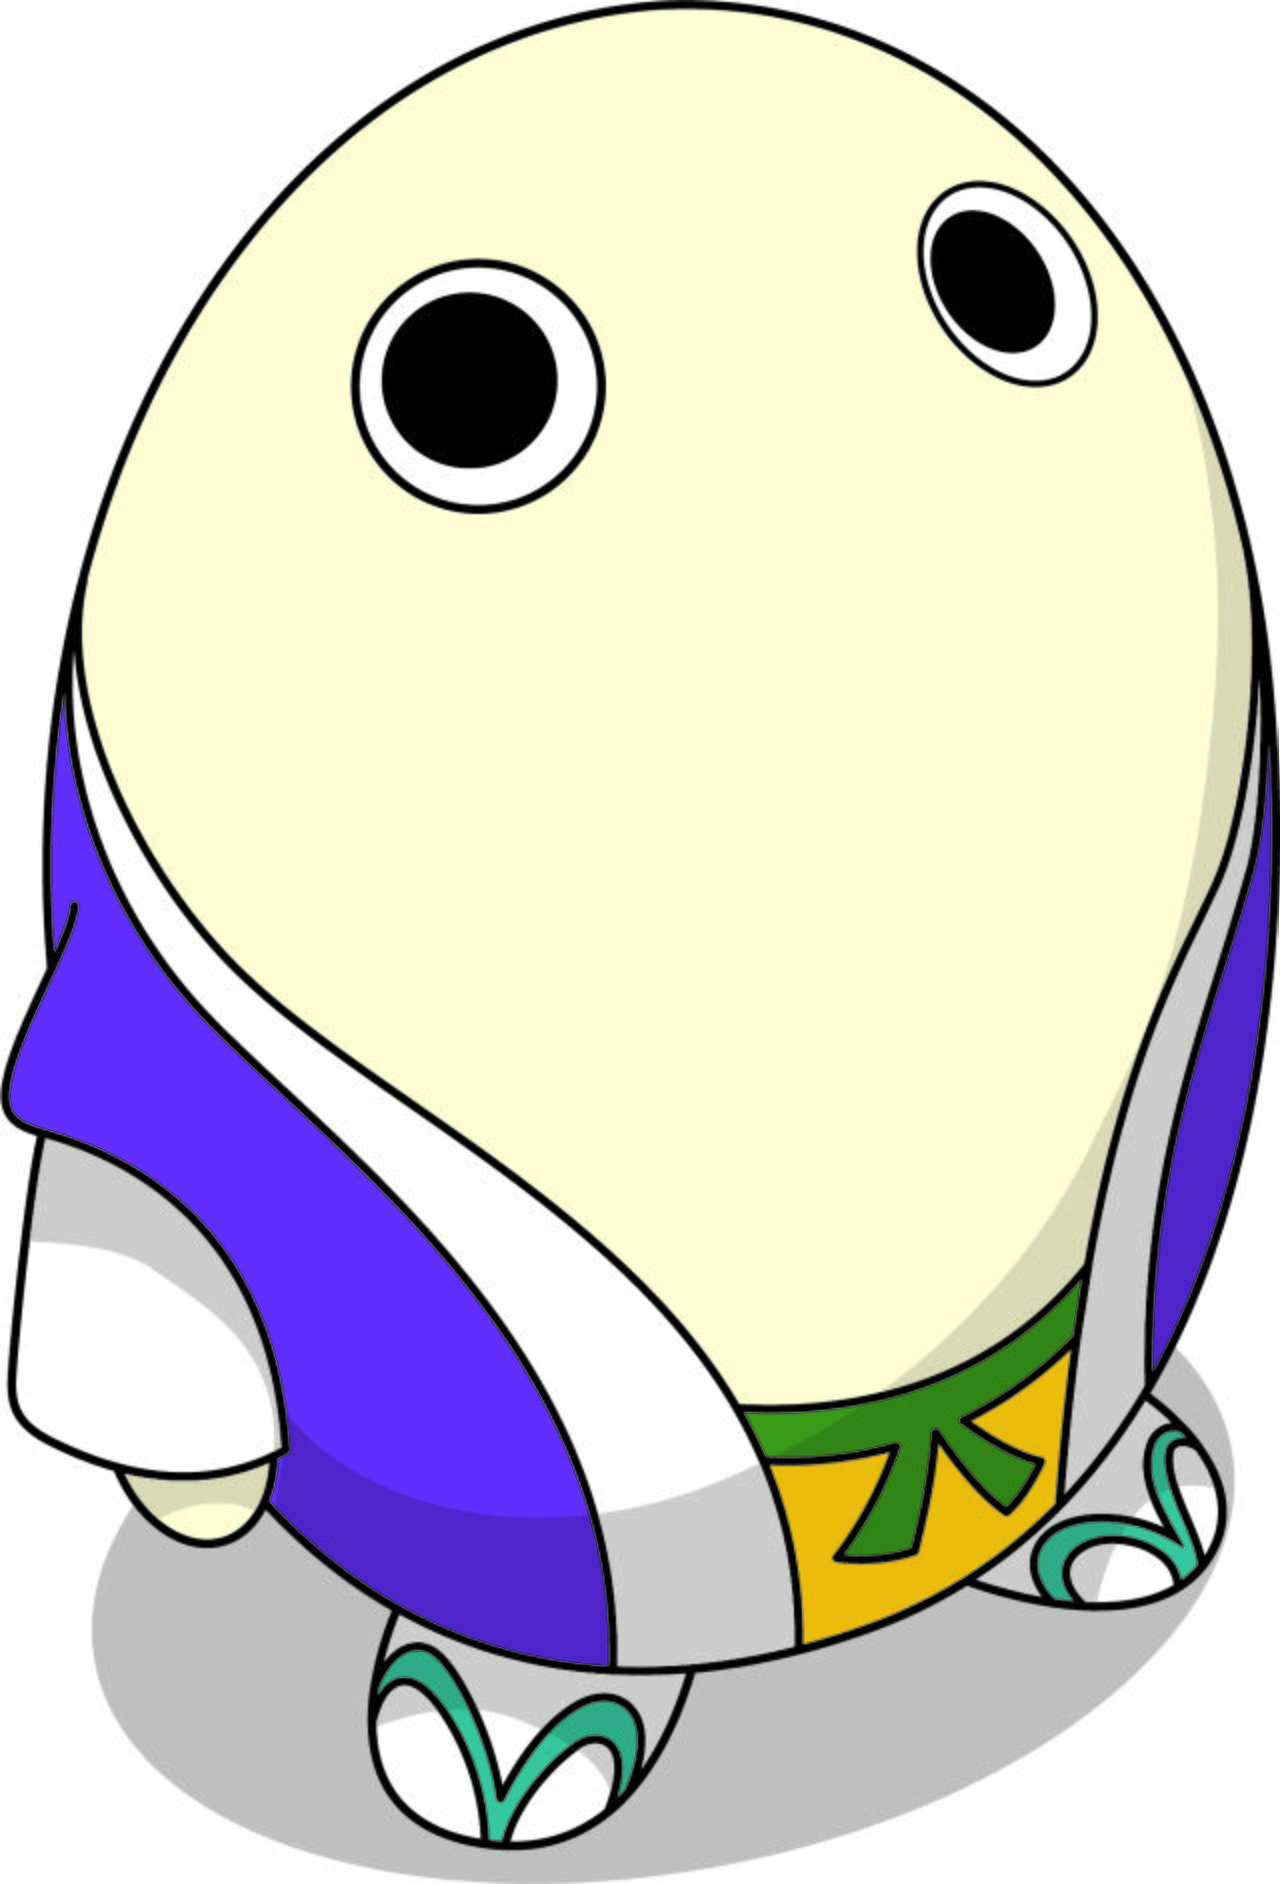 Mayumaro is the mascot for Kyoto Prefecture, taking its name and appearance from a silkworm cocoon (mayu), due to the use of silk in local kimonos. (© Kyoto Prefecture. Mayumaro #22038)